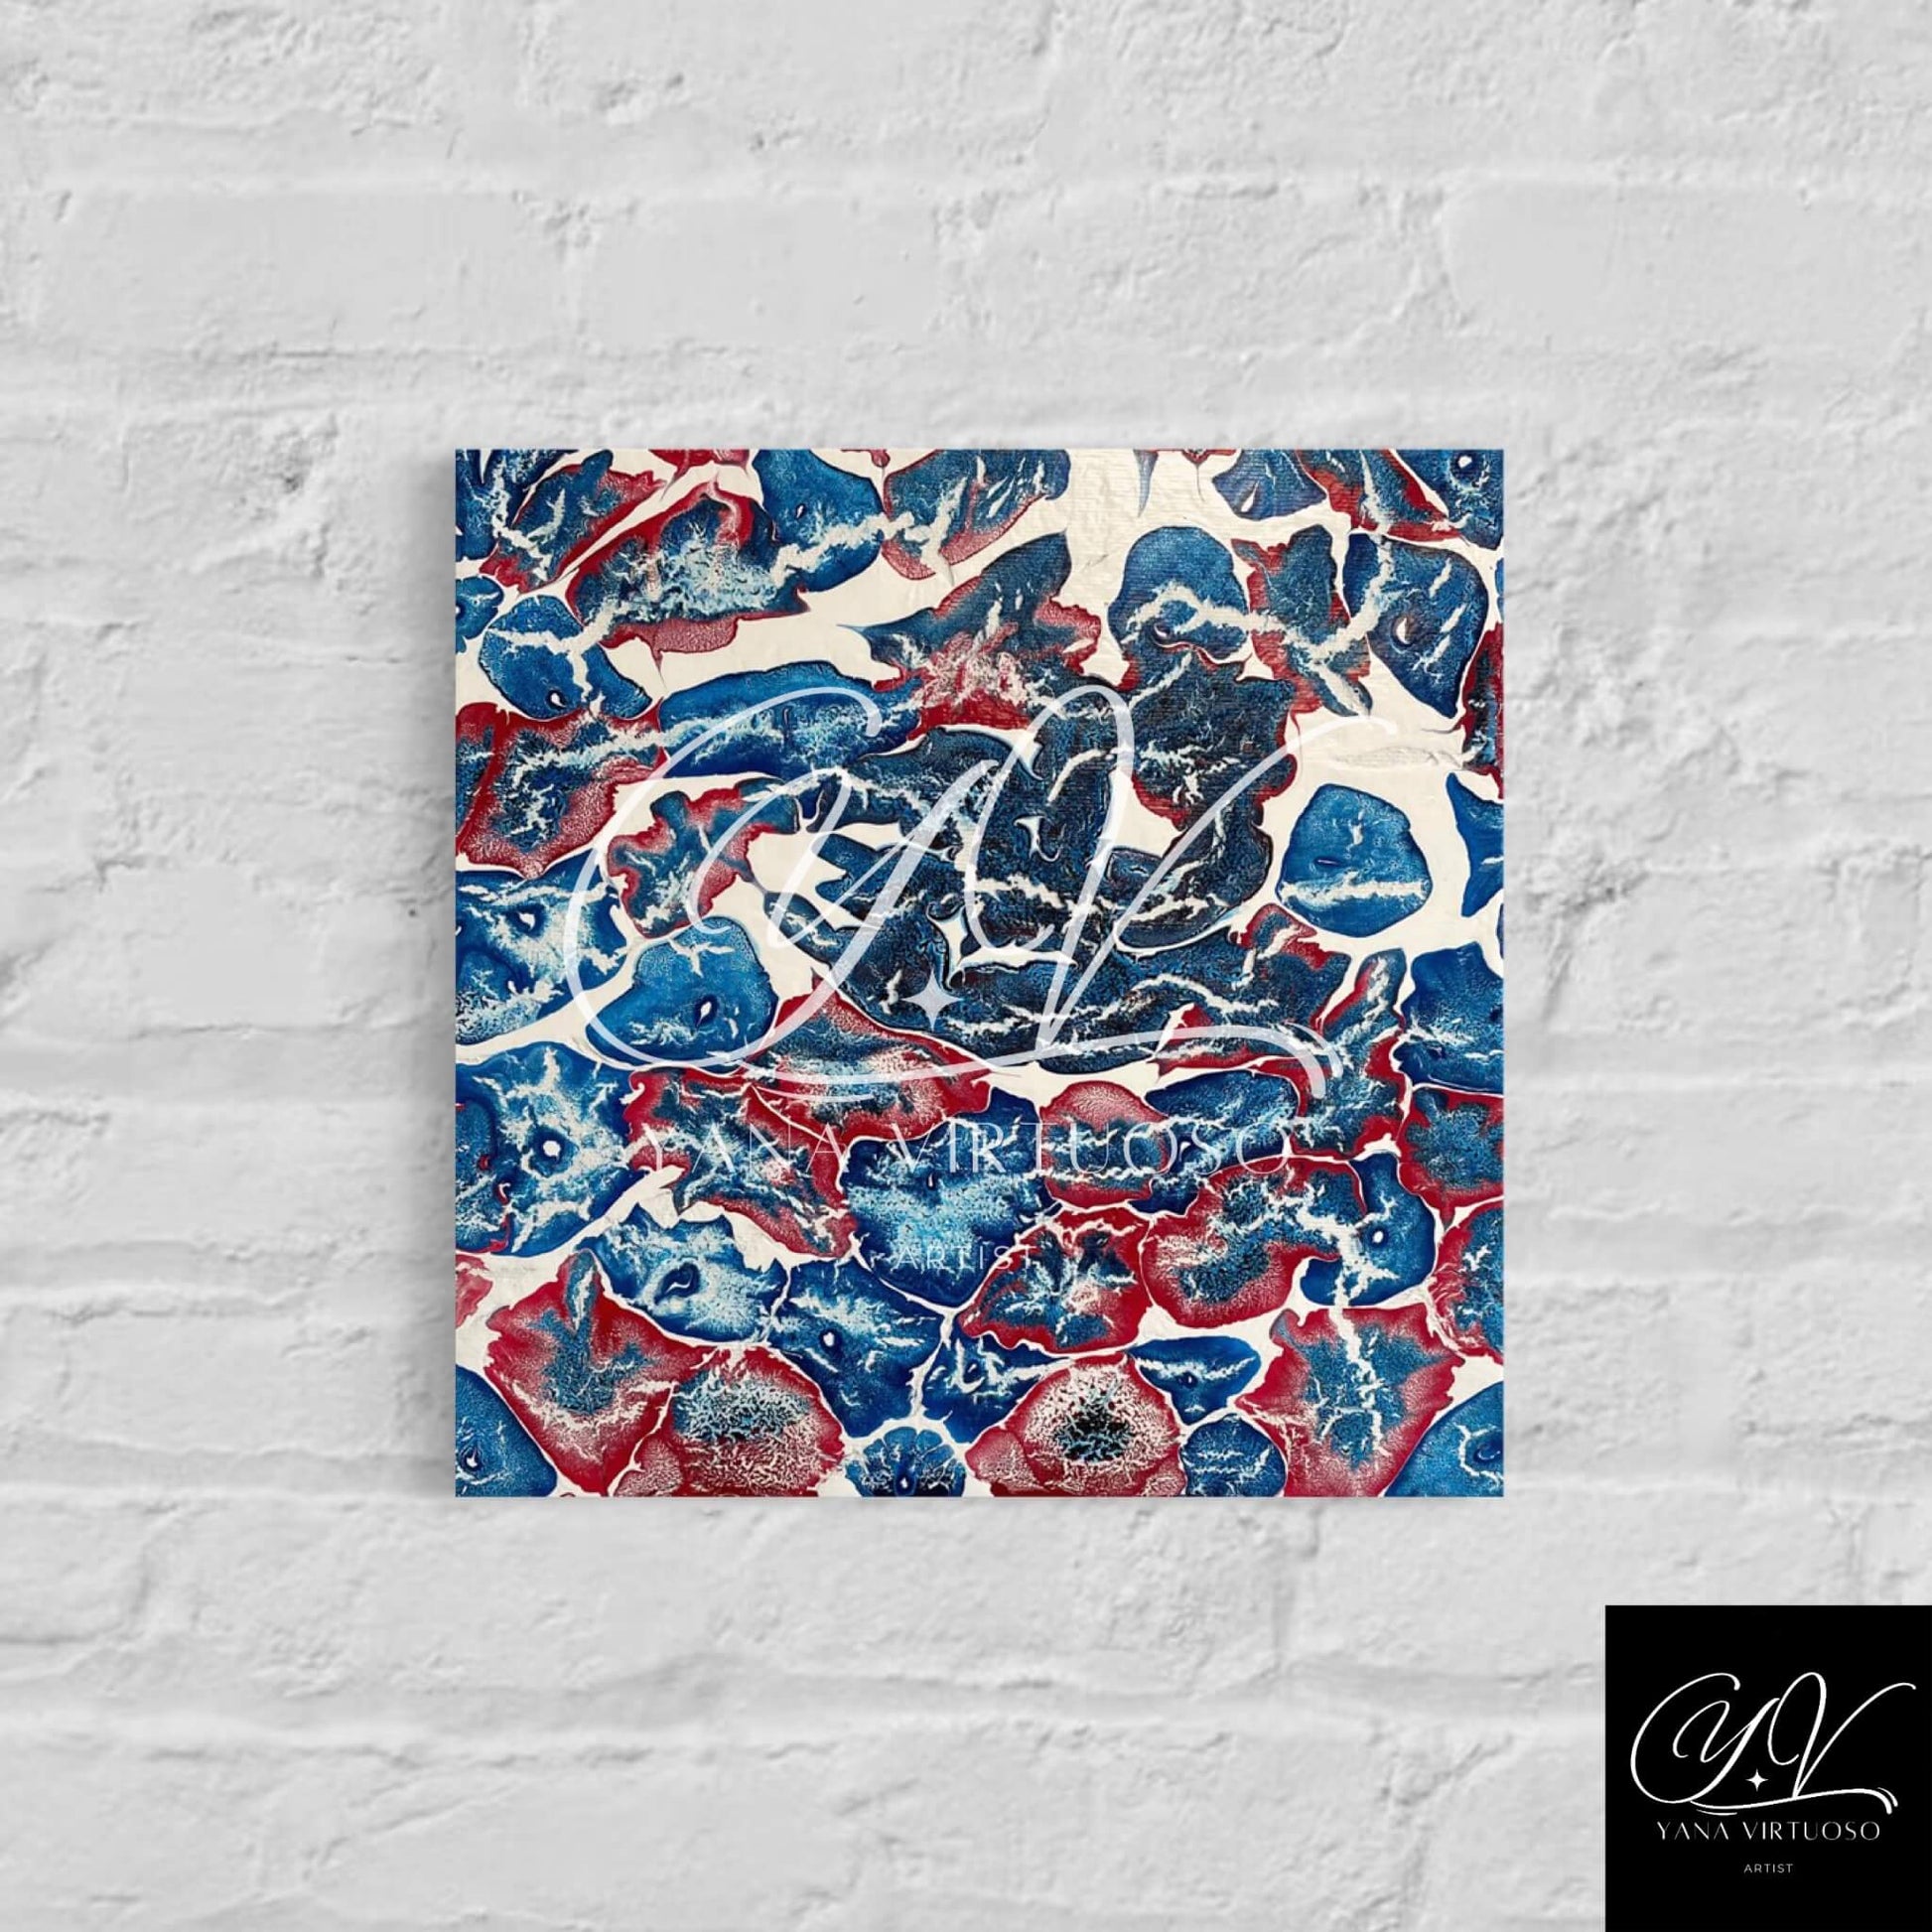 Medium shot of the "Marine Animals" painting hung on a wall, showcasing its full canvas and the vivid portrayal of aquatic life through swirls of red, blue, and white.